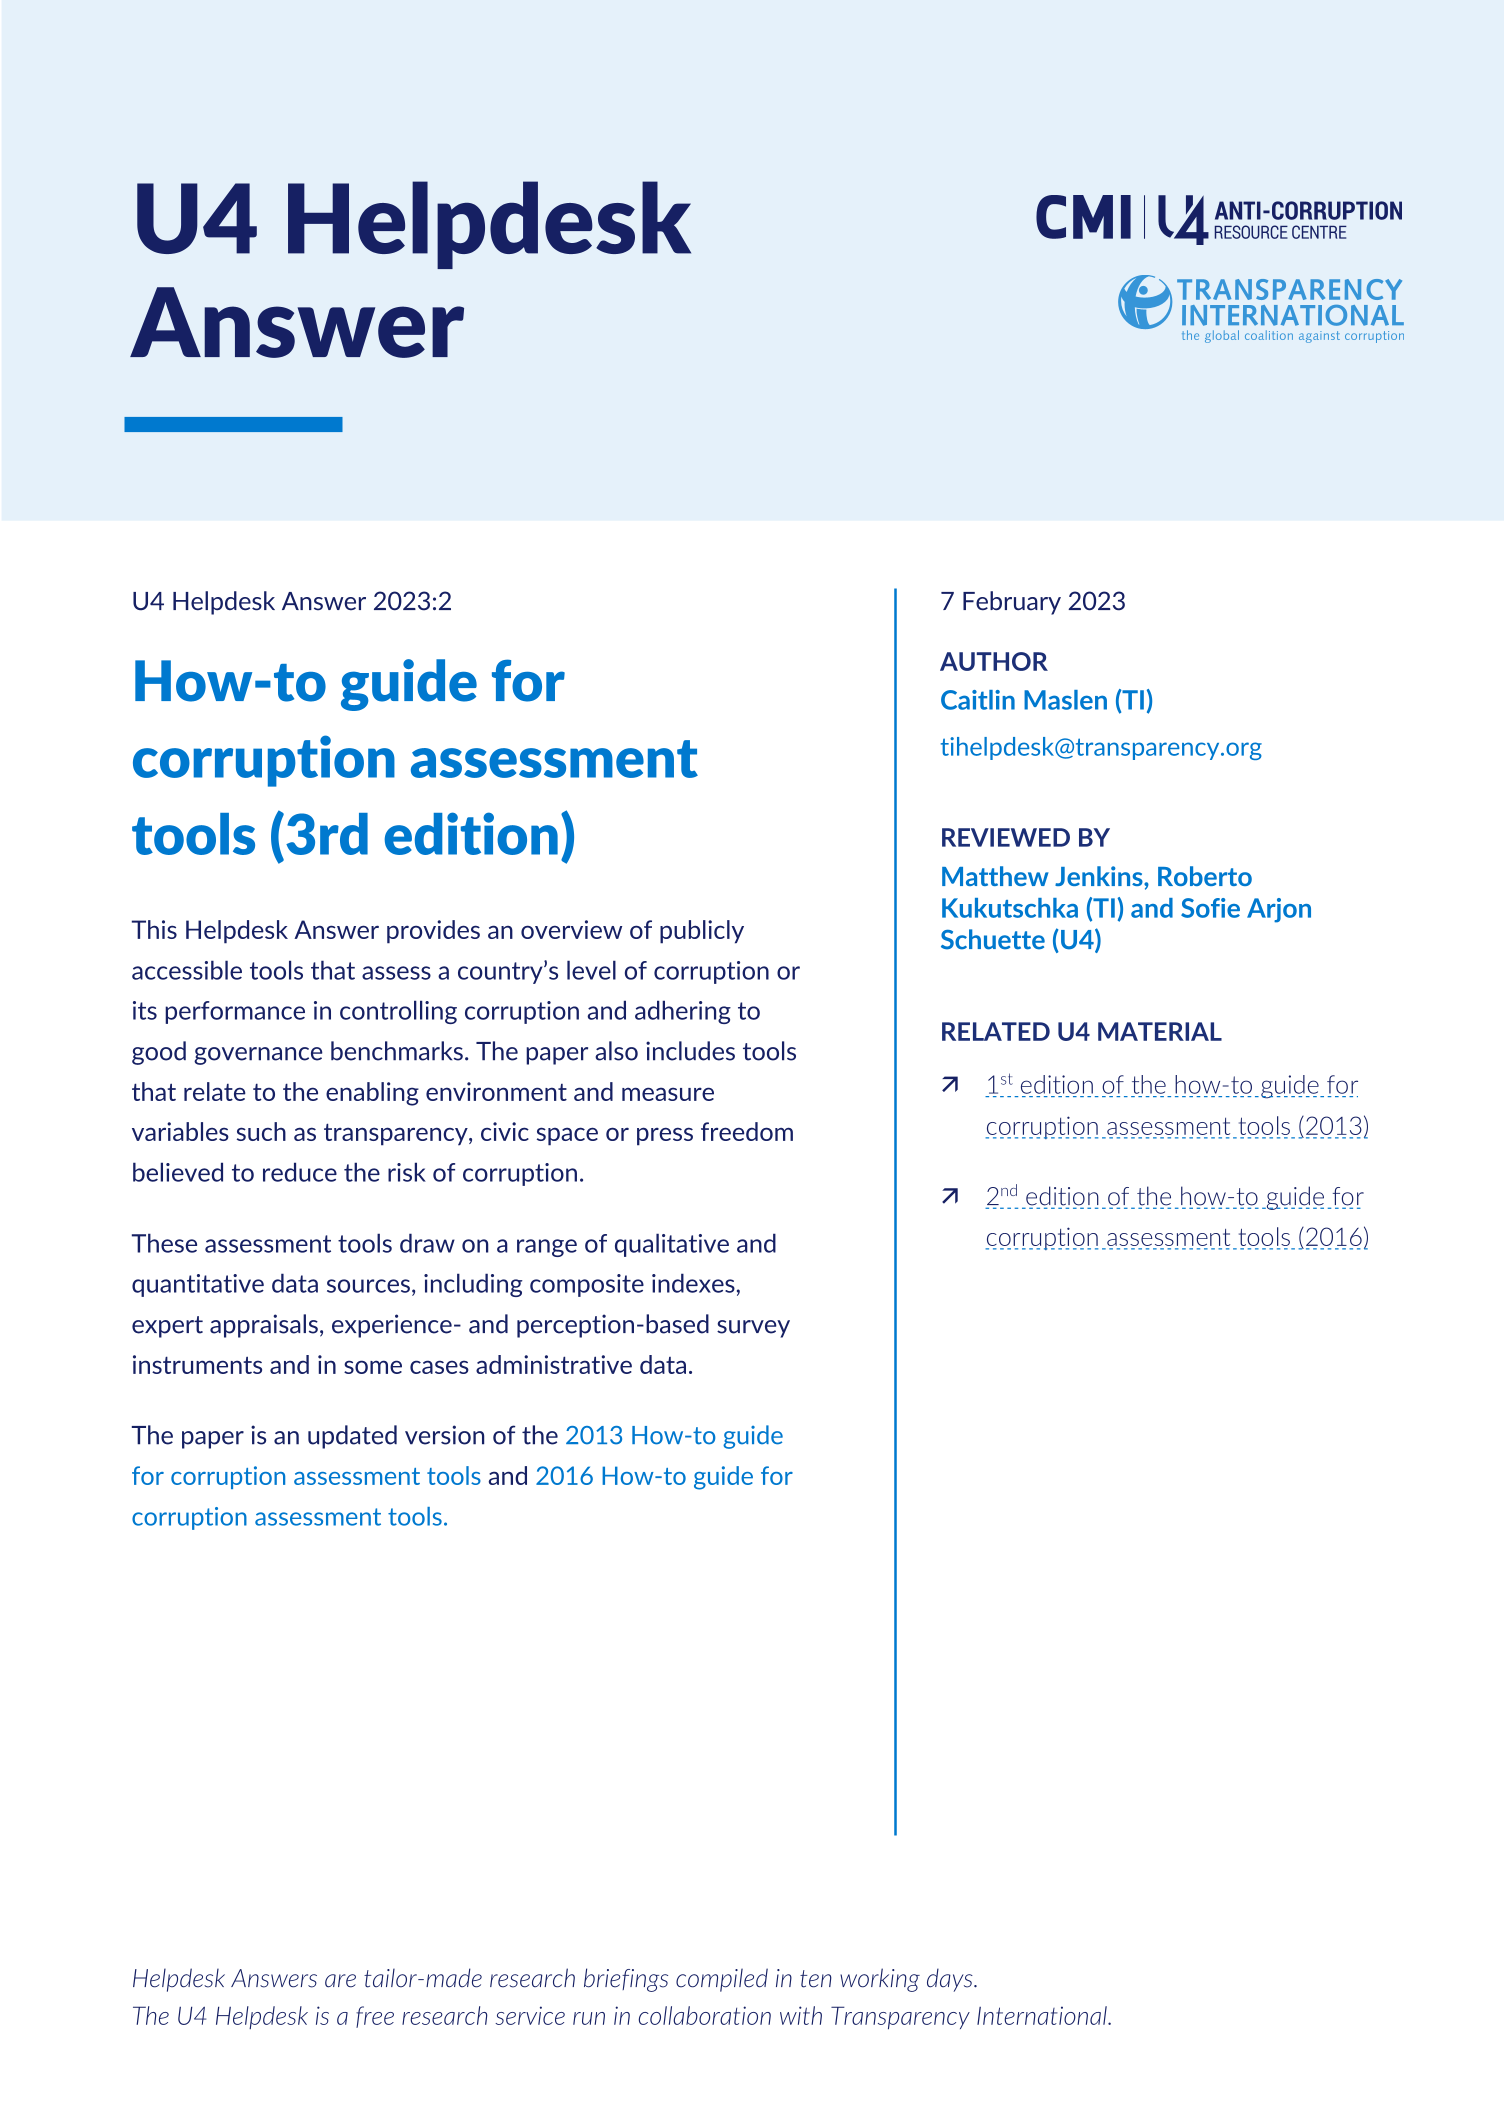 How-to guide for corruption assessment tools (3rd edition)